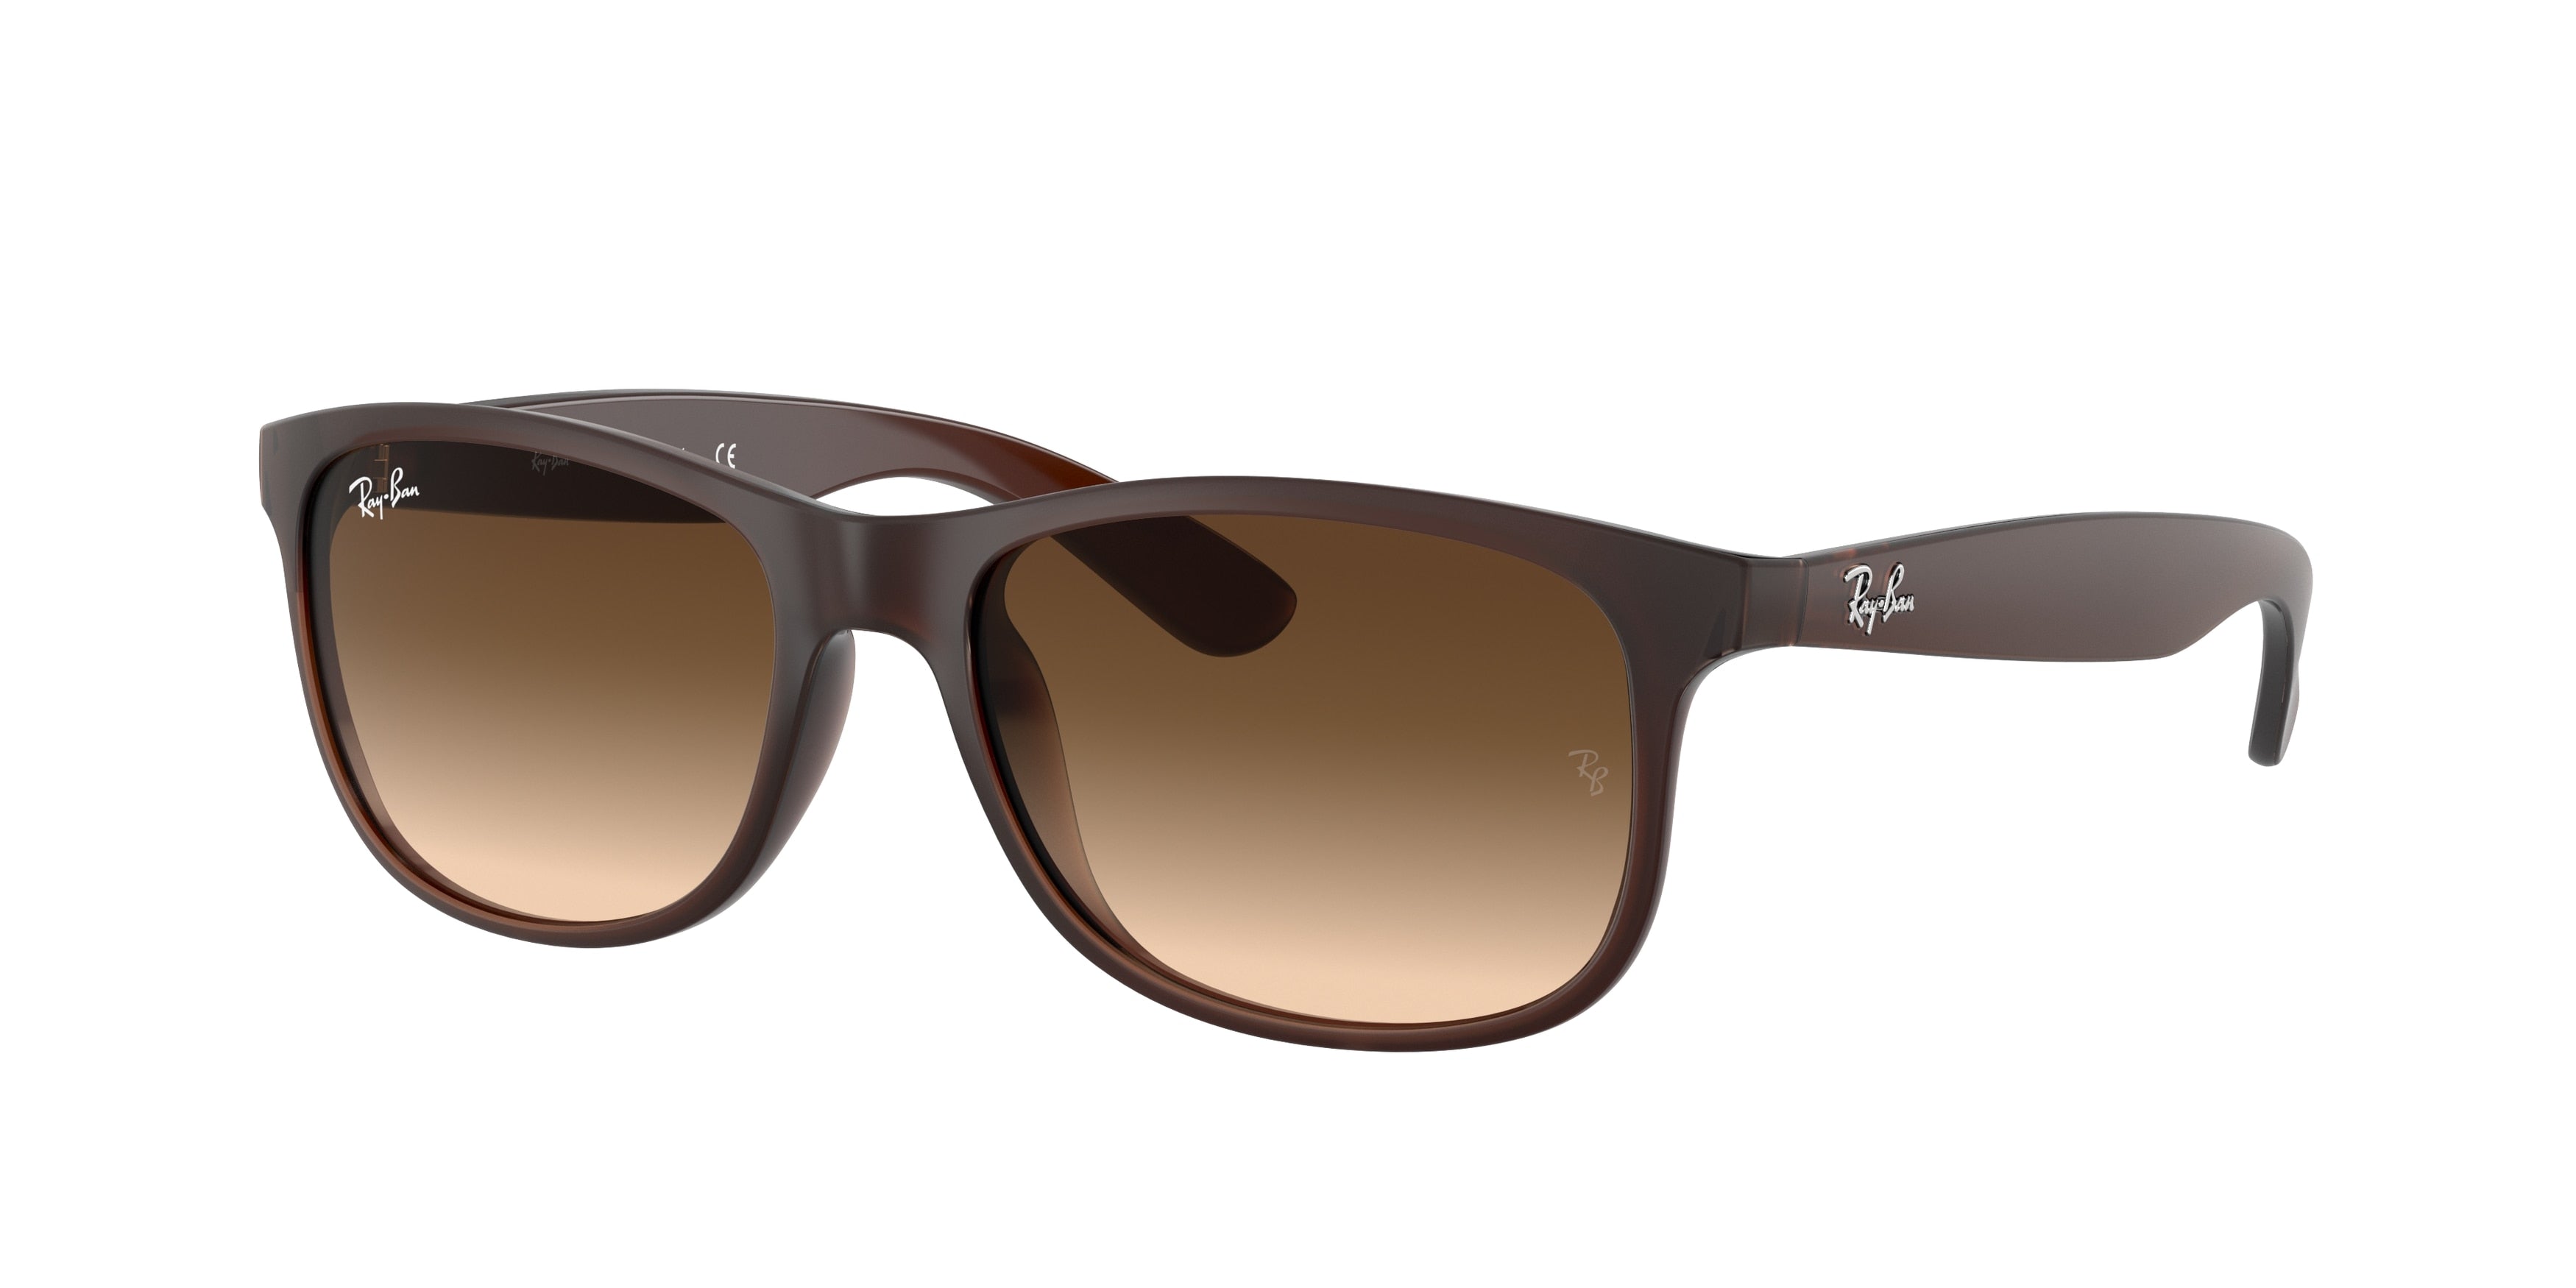 Ray-Ban ANDY RB4202 Square Sunglasses  607313-Brown 55-145-17 - Color Map Brown